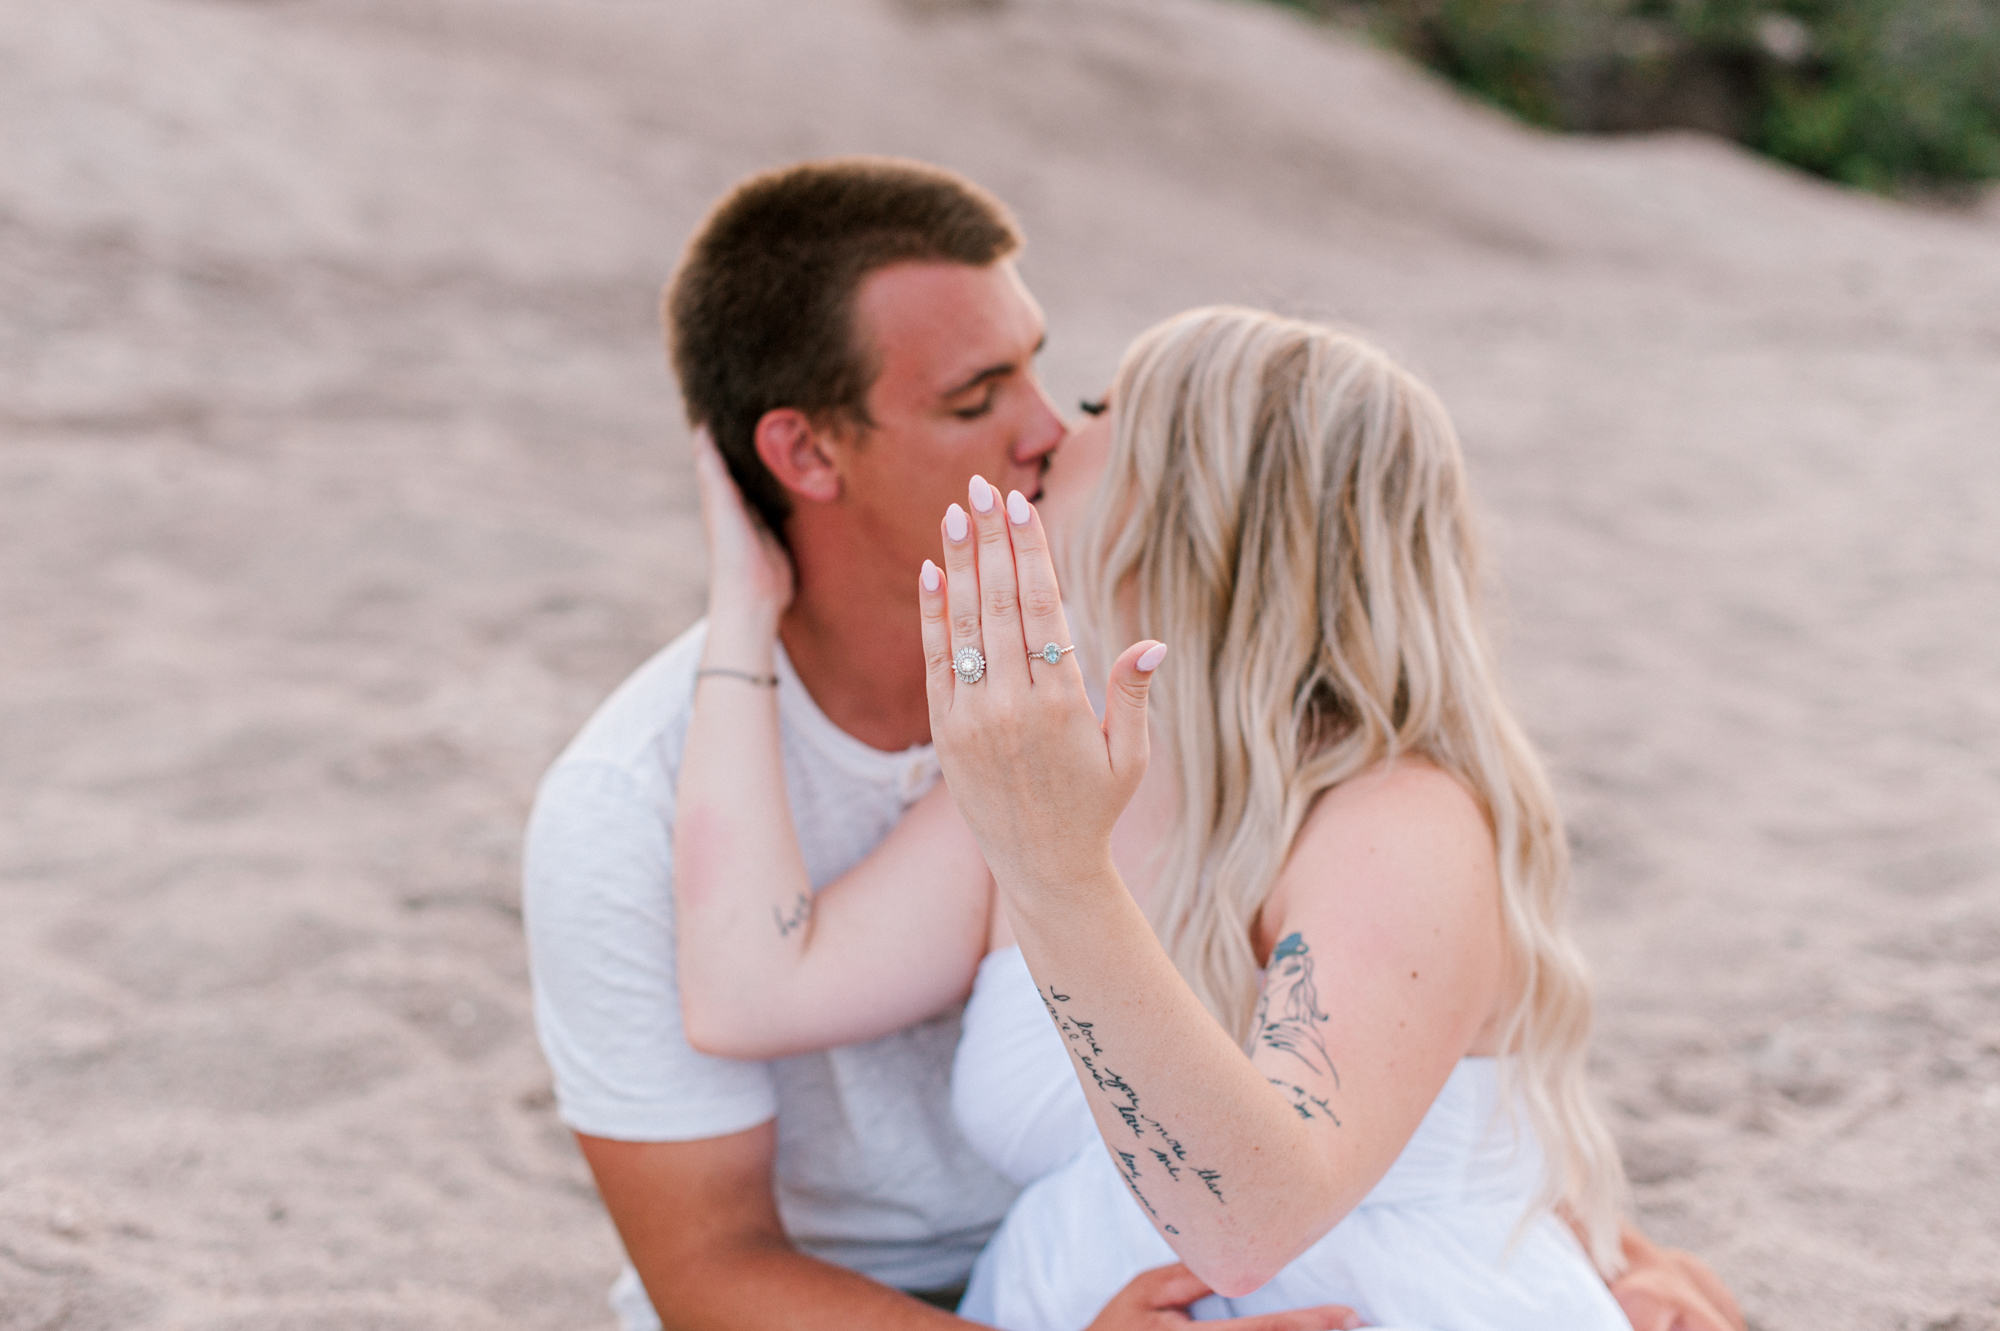 Couple kissing near the dunes while the young girl shows off her engagement ring during their photoshoot on the beach